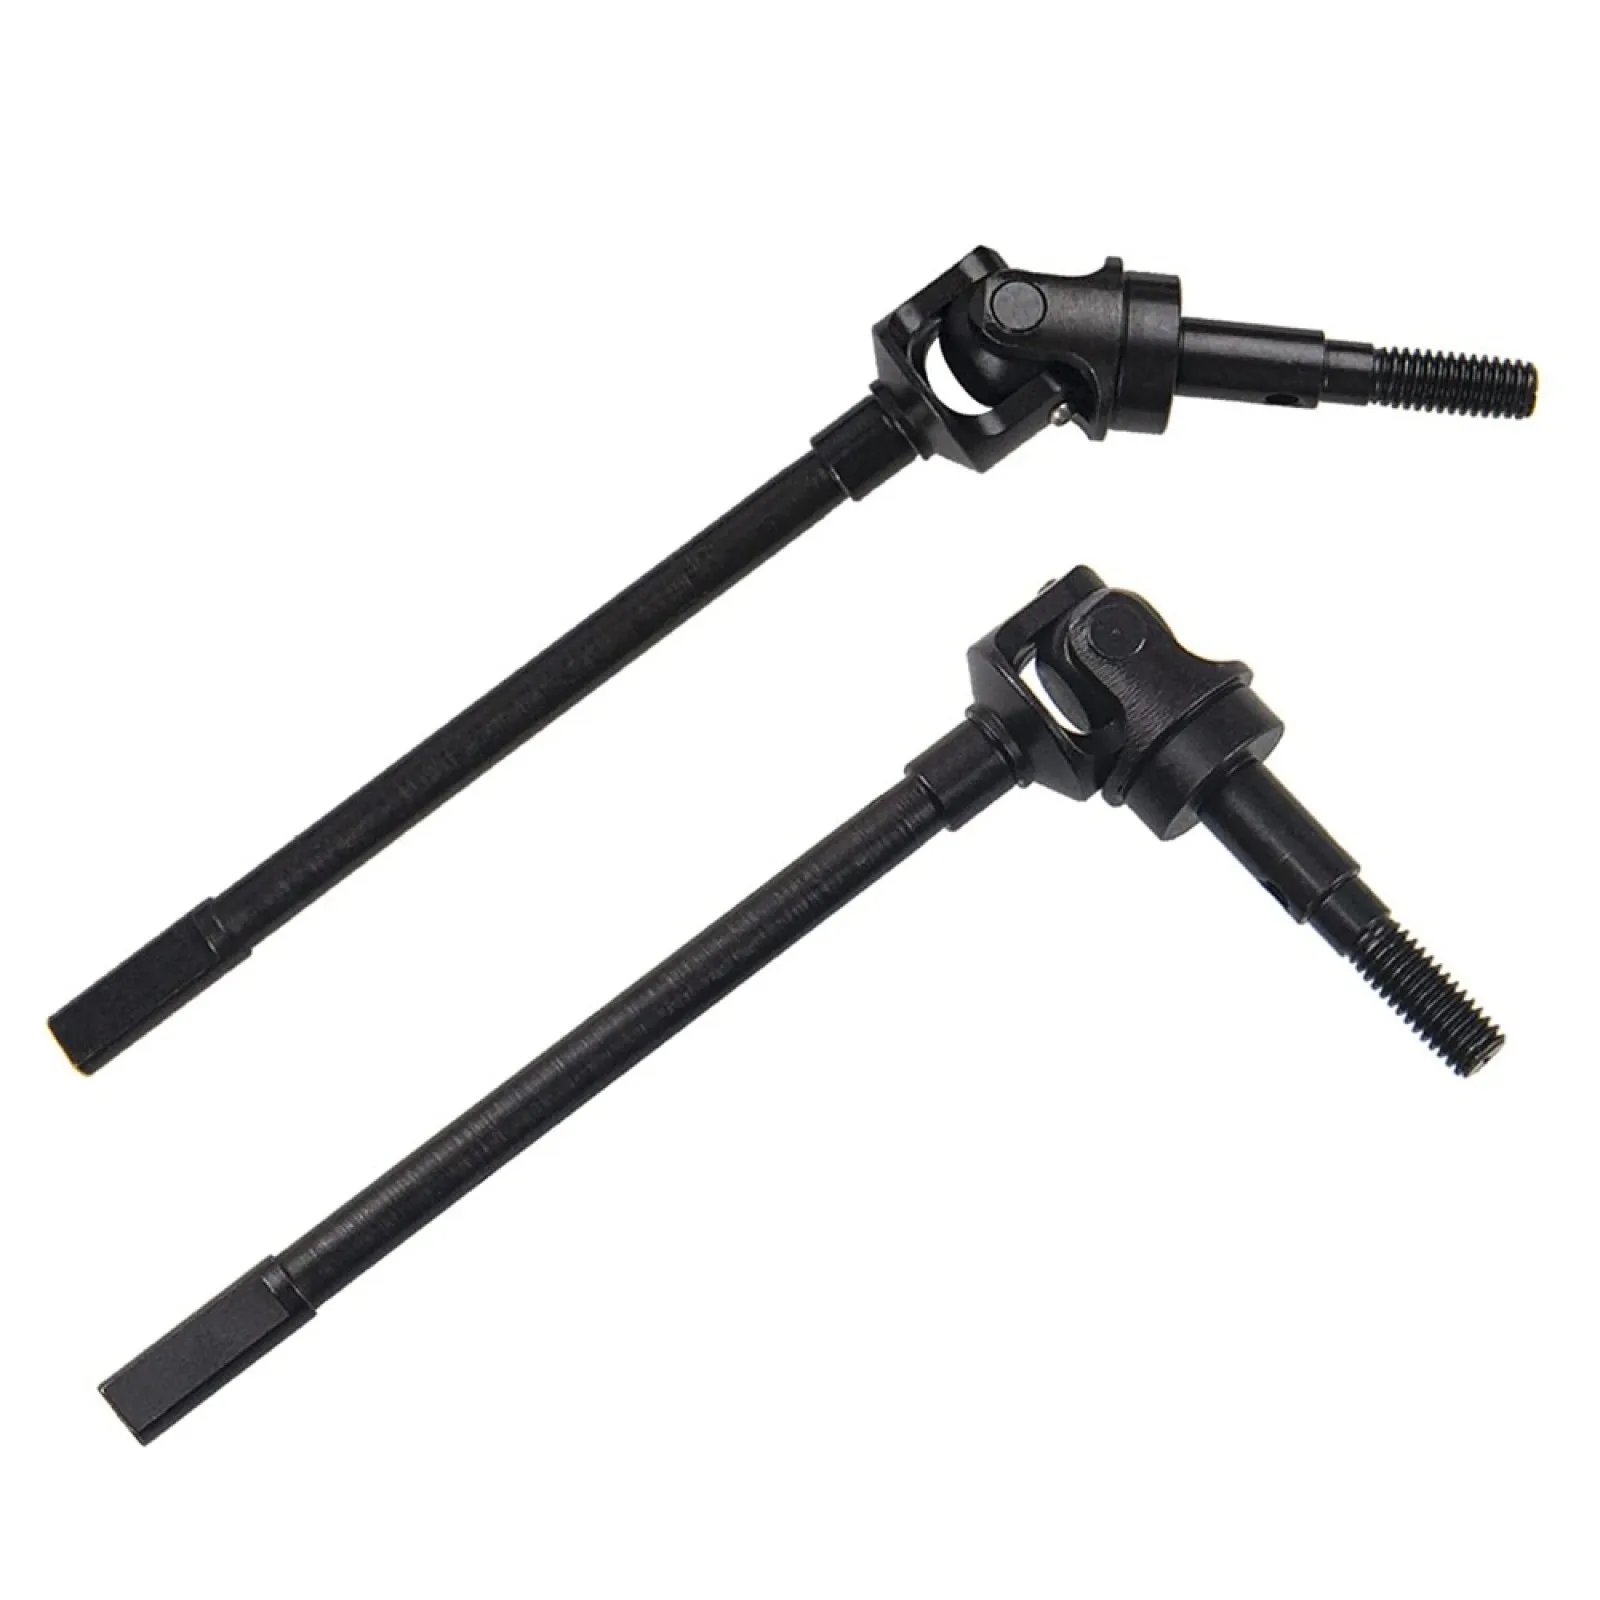 Rep Front Rear Axle CVD Drive Shafts For AXIAL SCX10 II 90046 90047 1/10... - $173.85